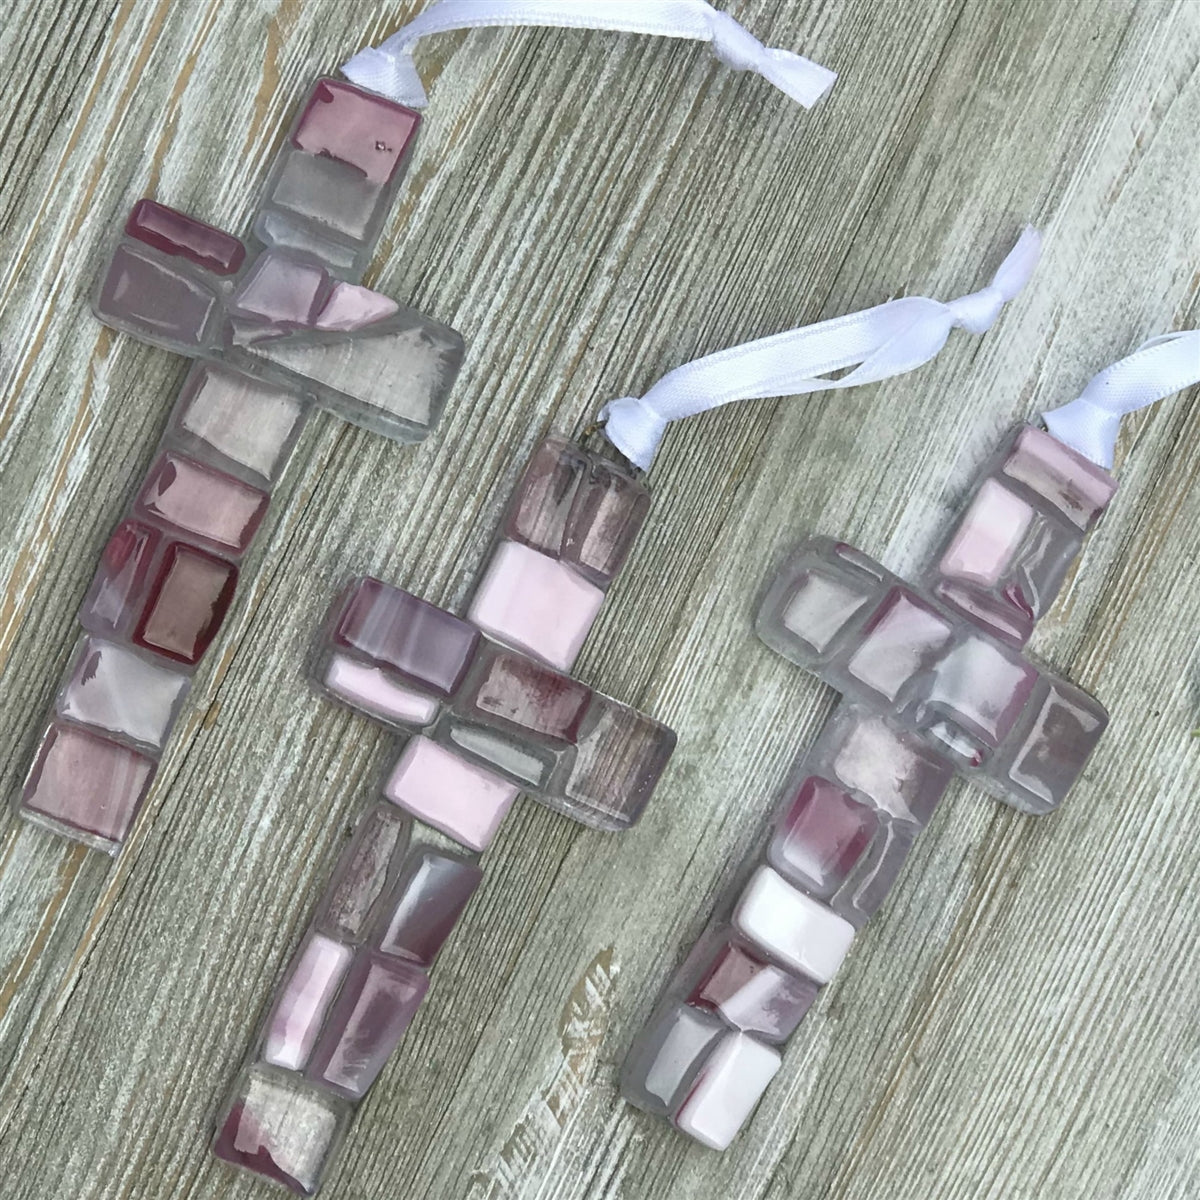 An assortment of pink mosaic crosses with varying shades of pink and white glass.